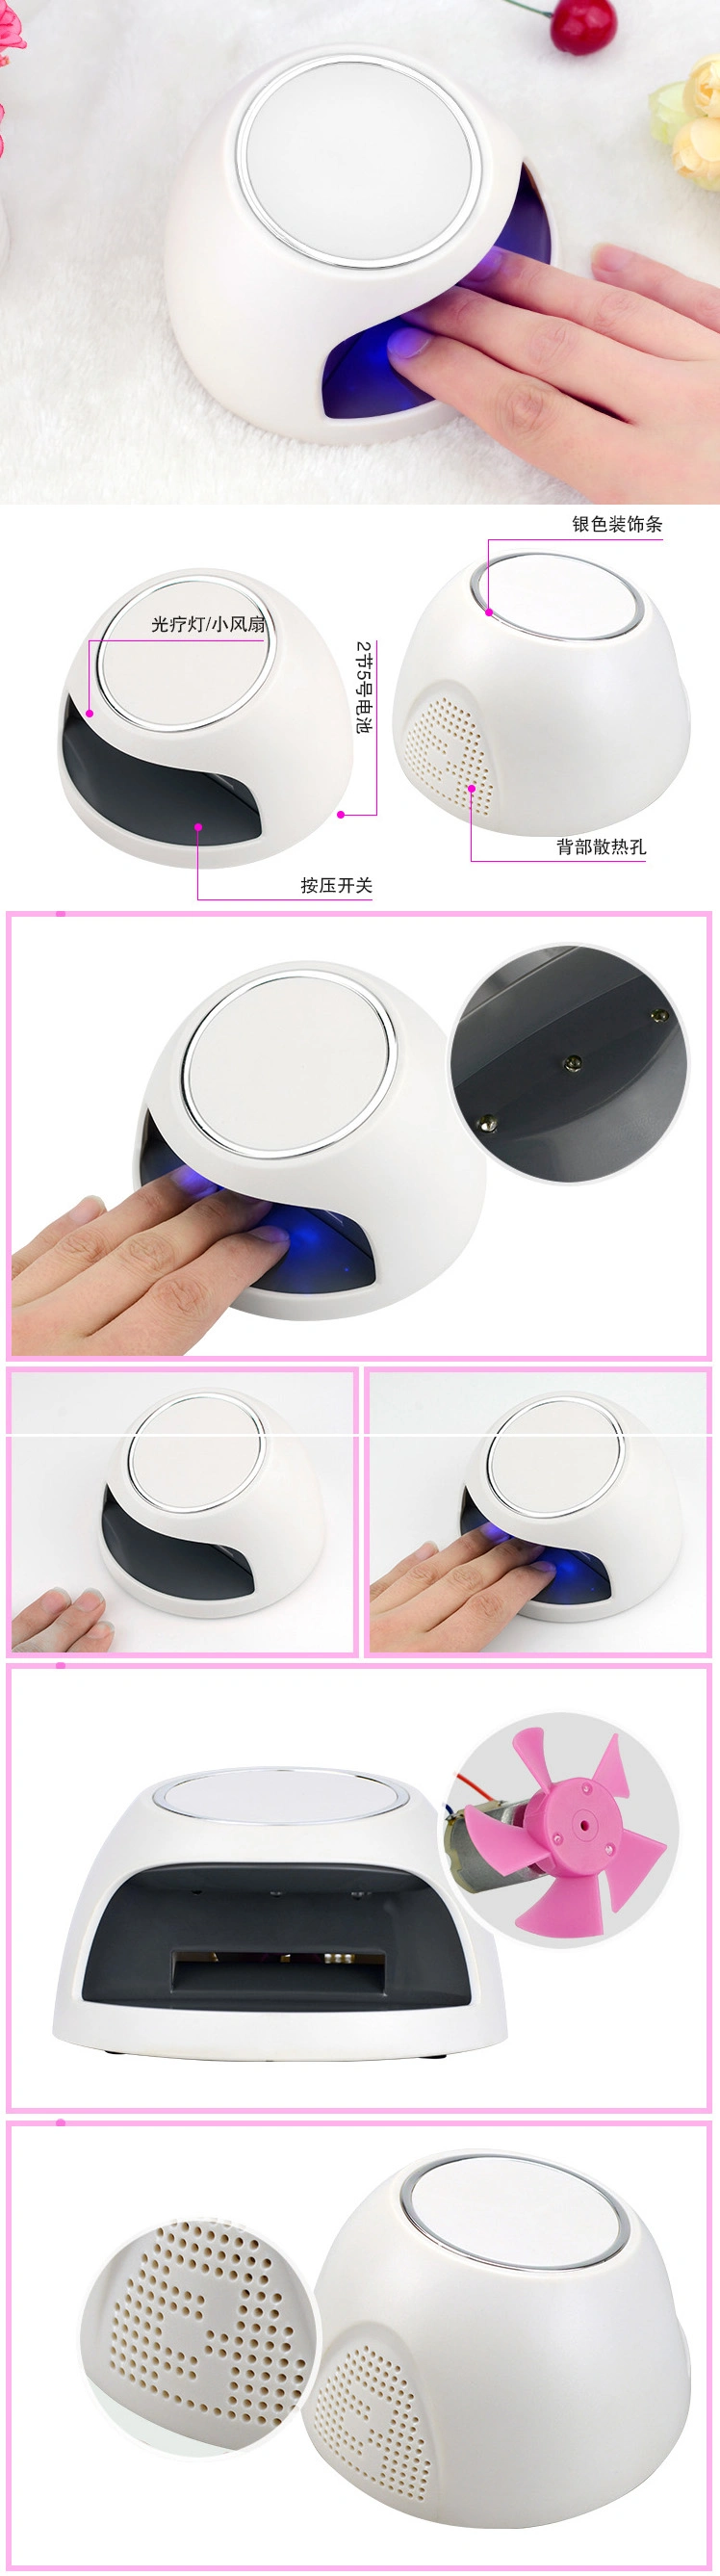 LED UV Lamp with Fan Fast Curing Nail Dryer Beauty Device